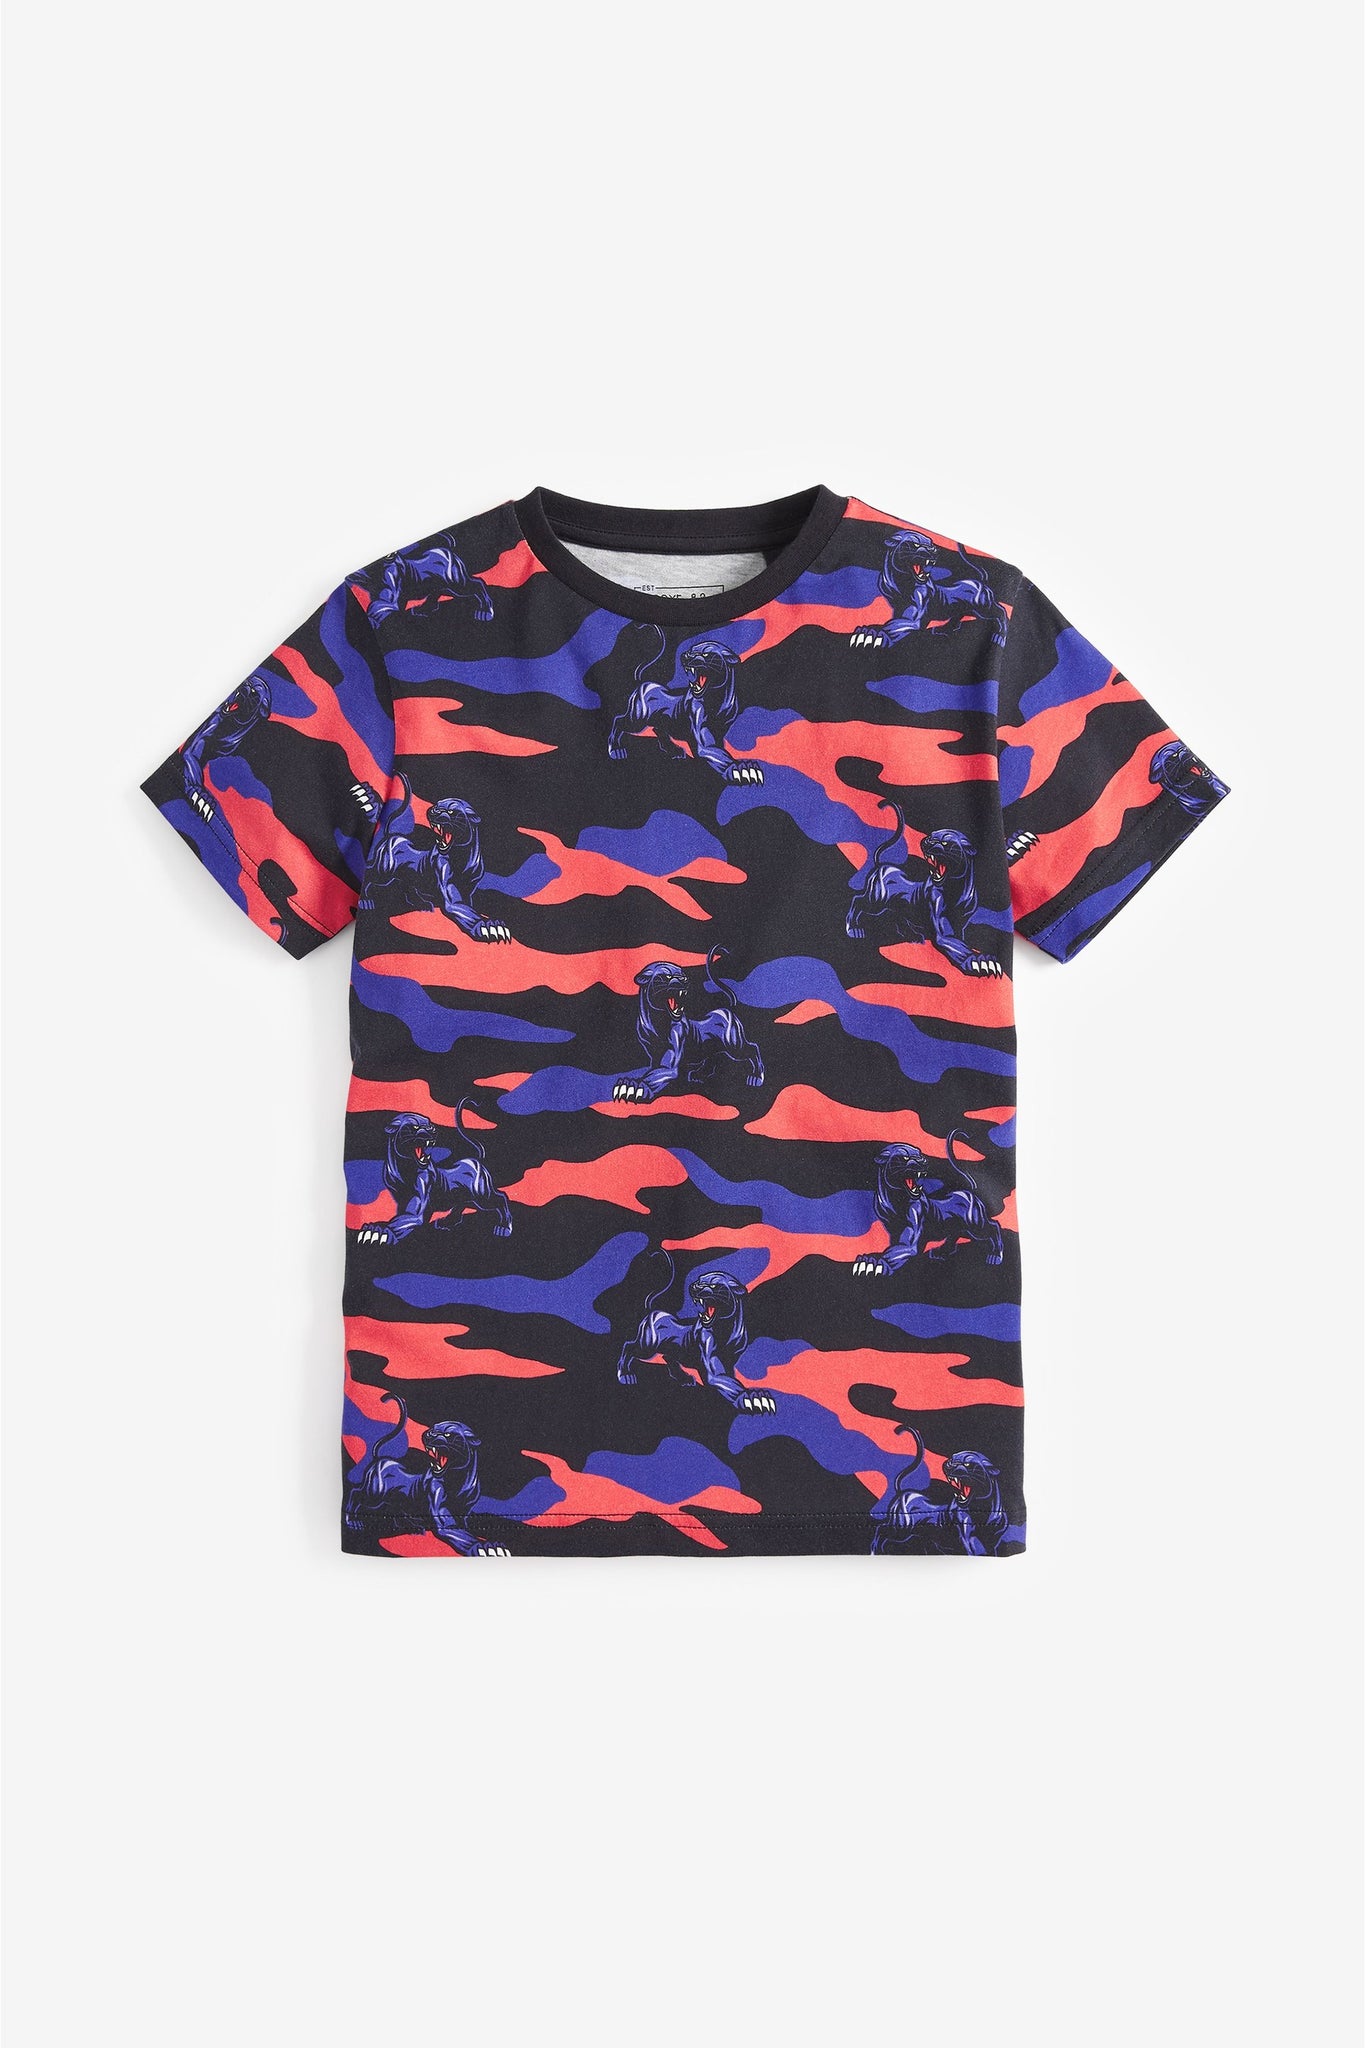 Next Multi All Over Print Panther Camo Older Boys T-Shirt - Stockpoint Apparel Outlet